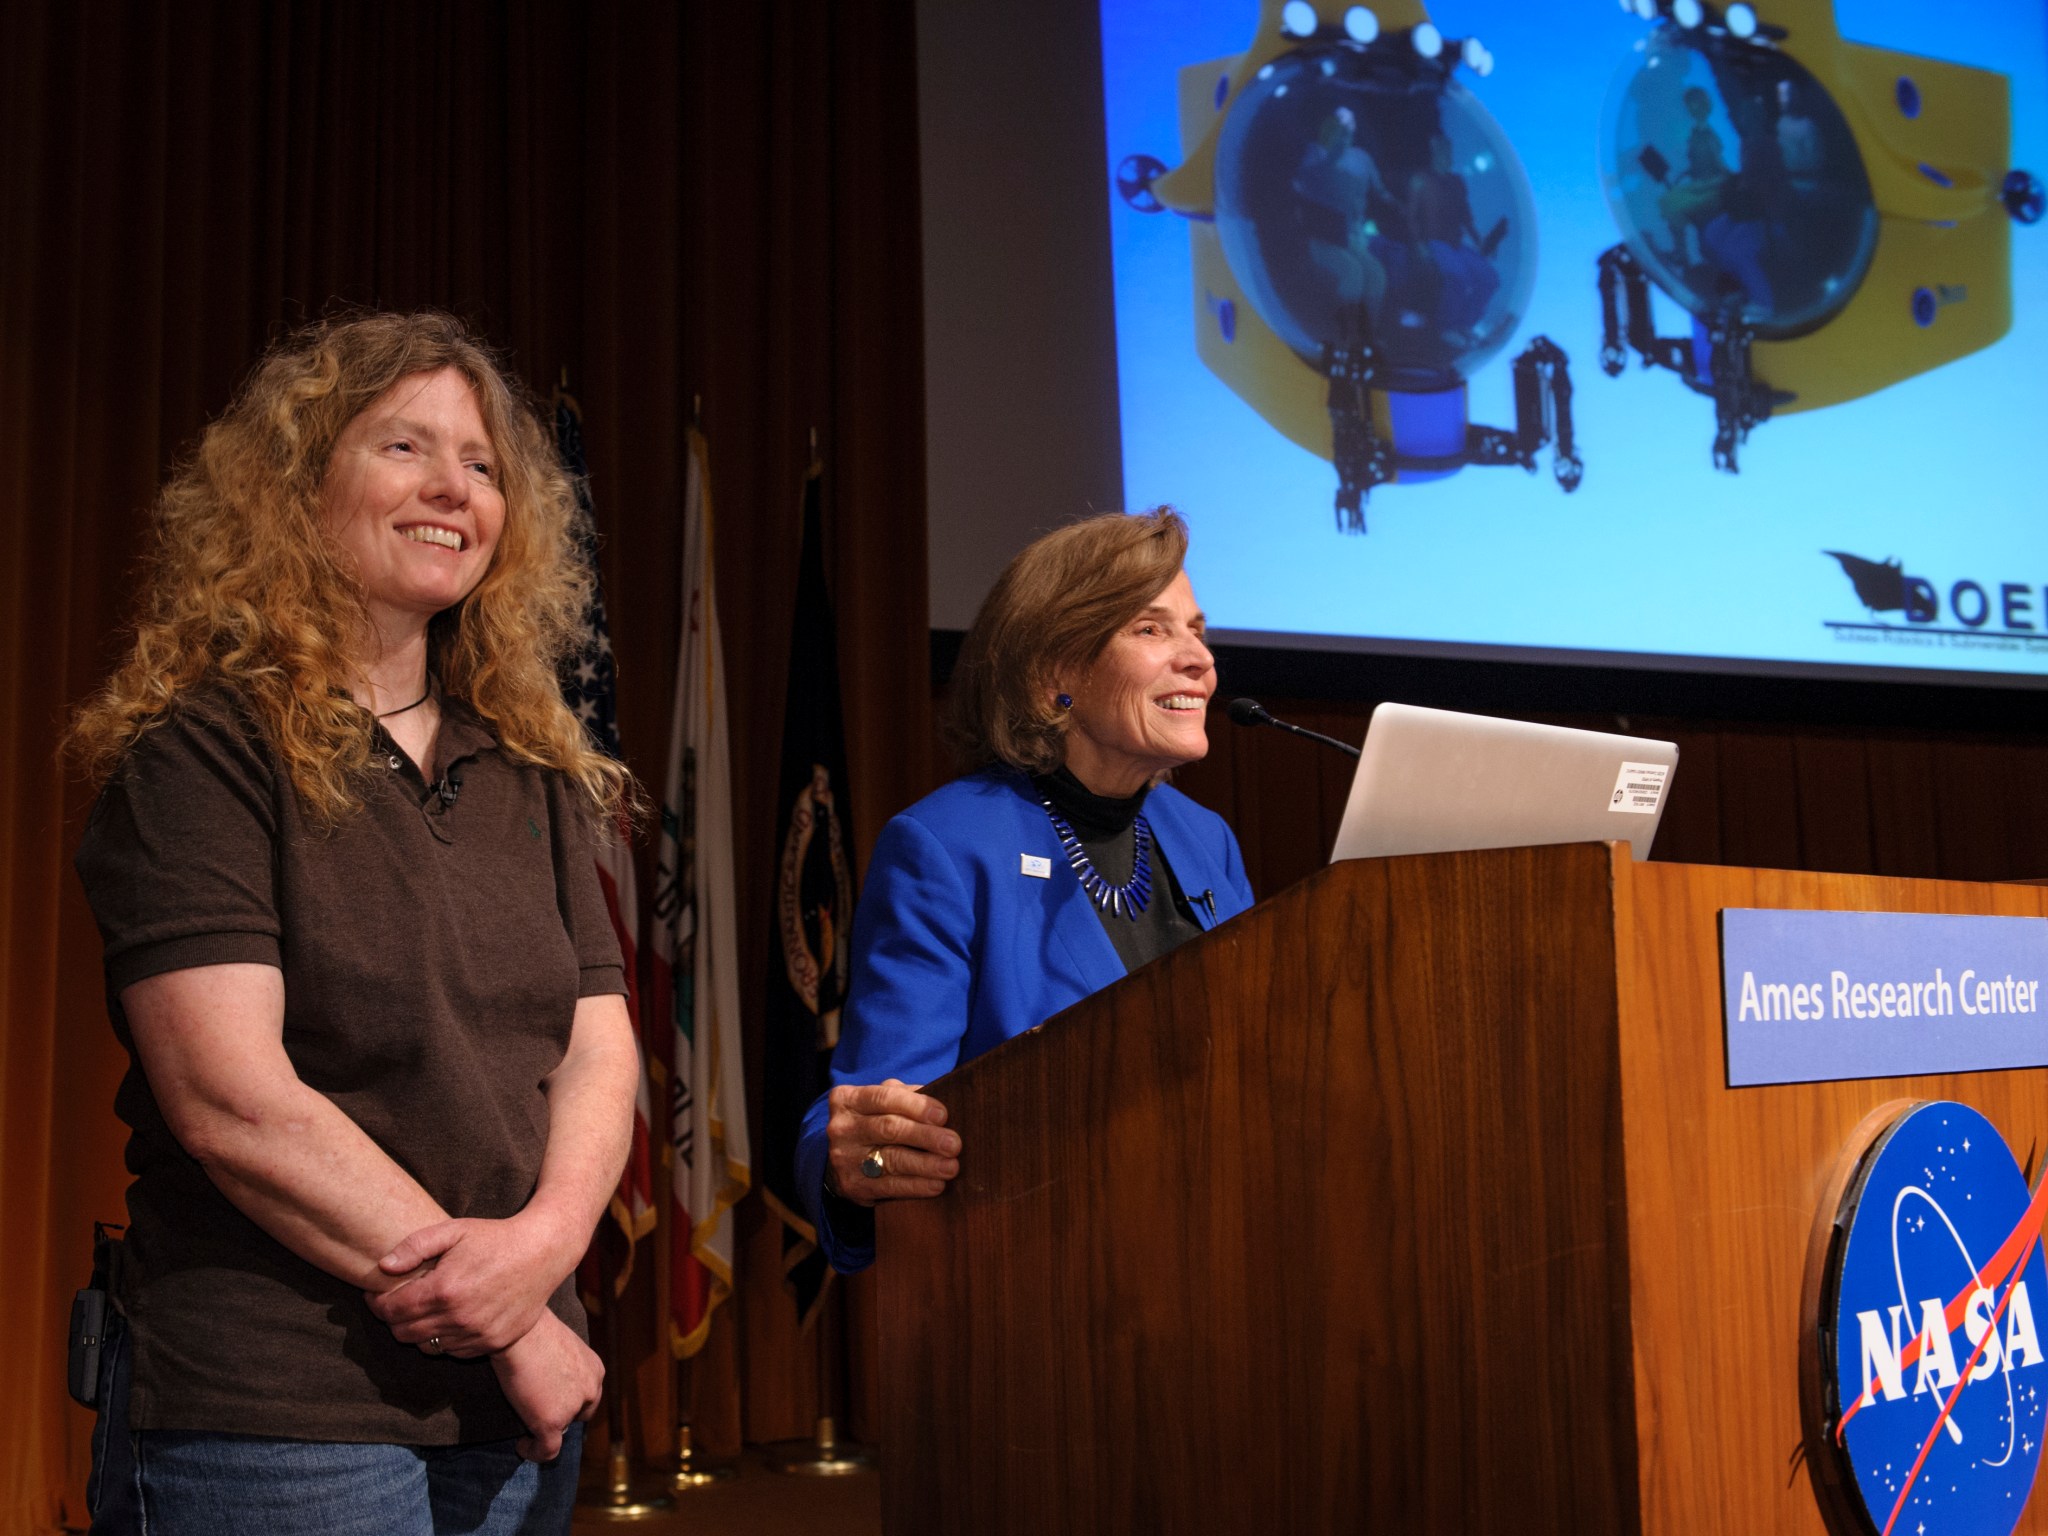 Dr. Sylvia Earle and Liz Taylor: Exploring the Deep Frontier